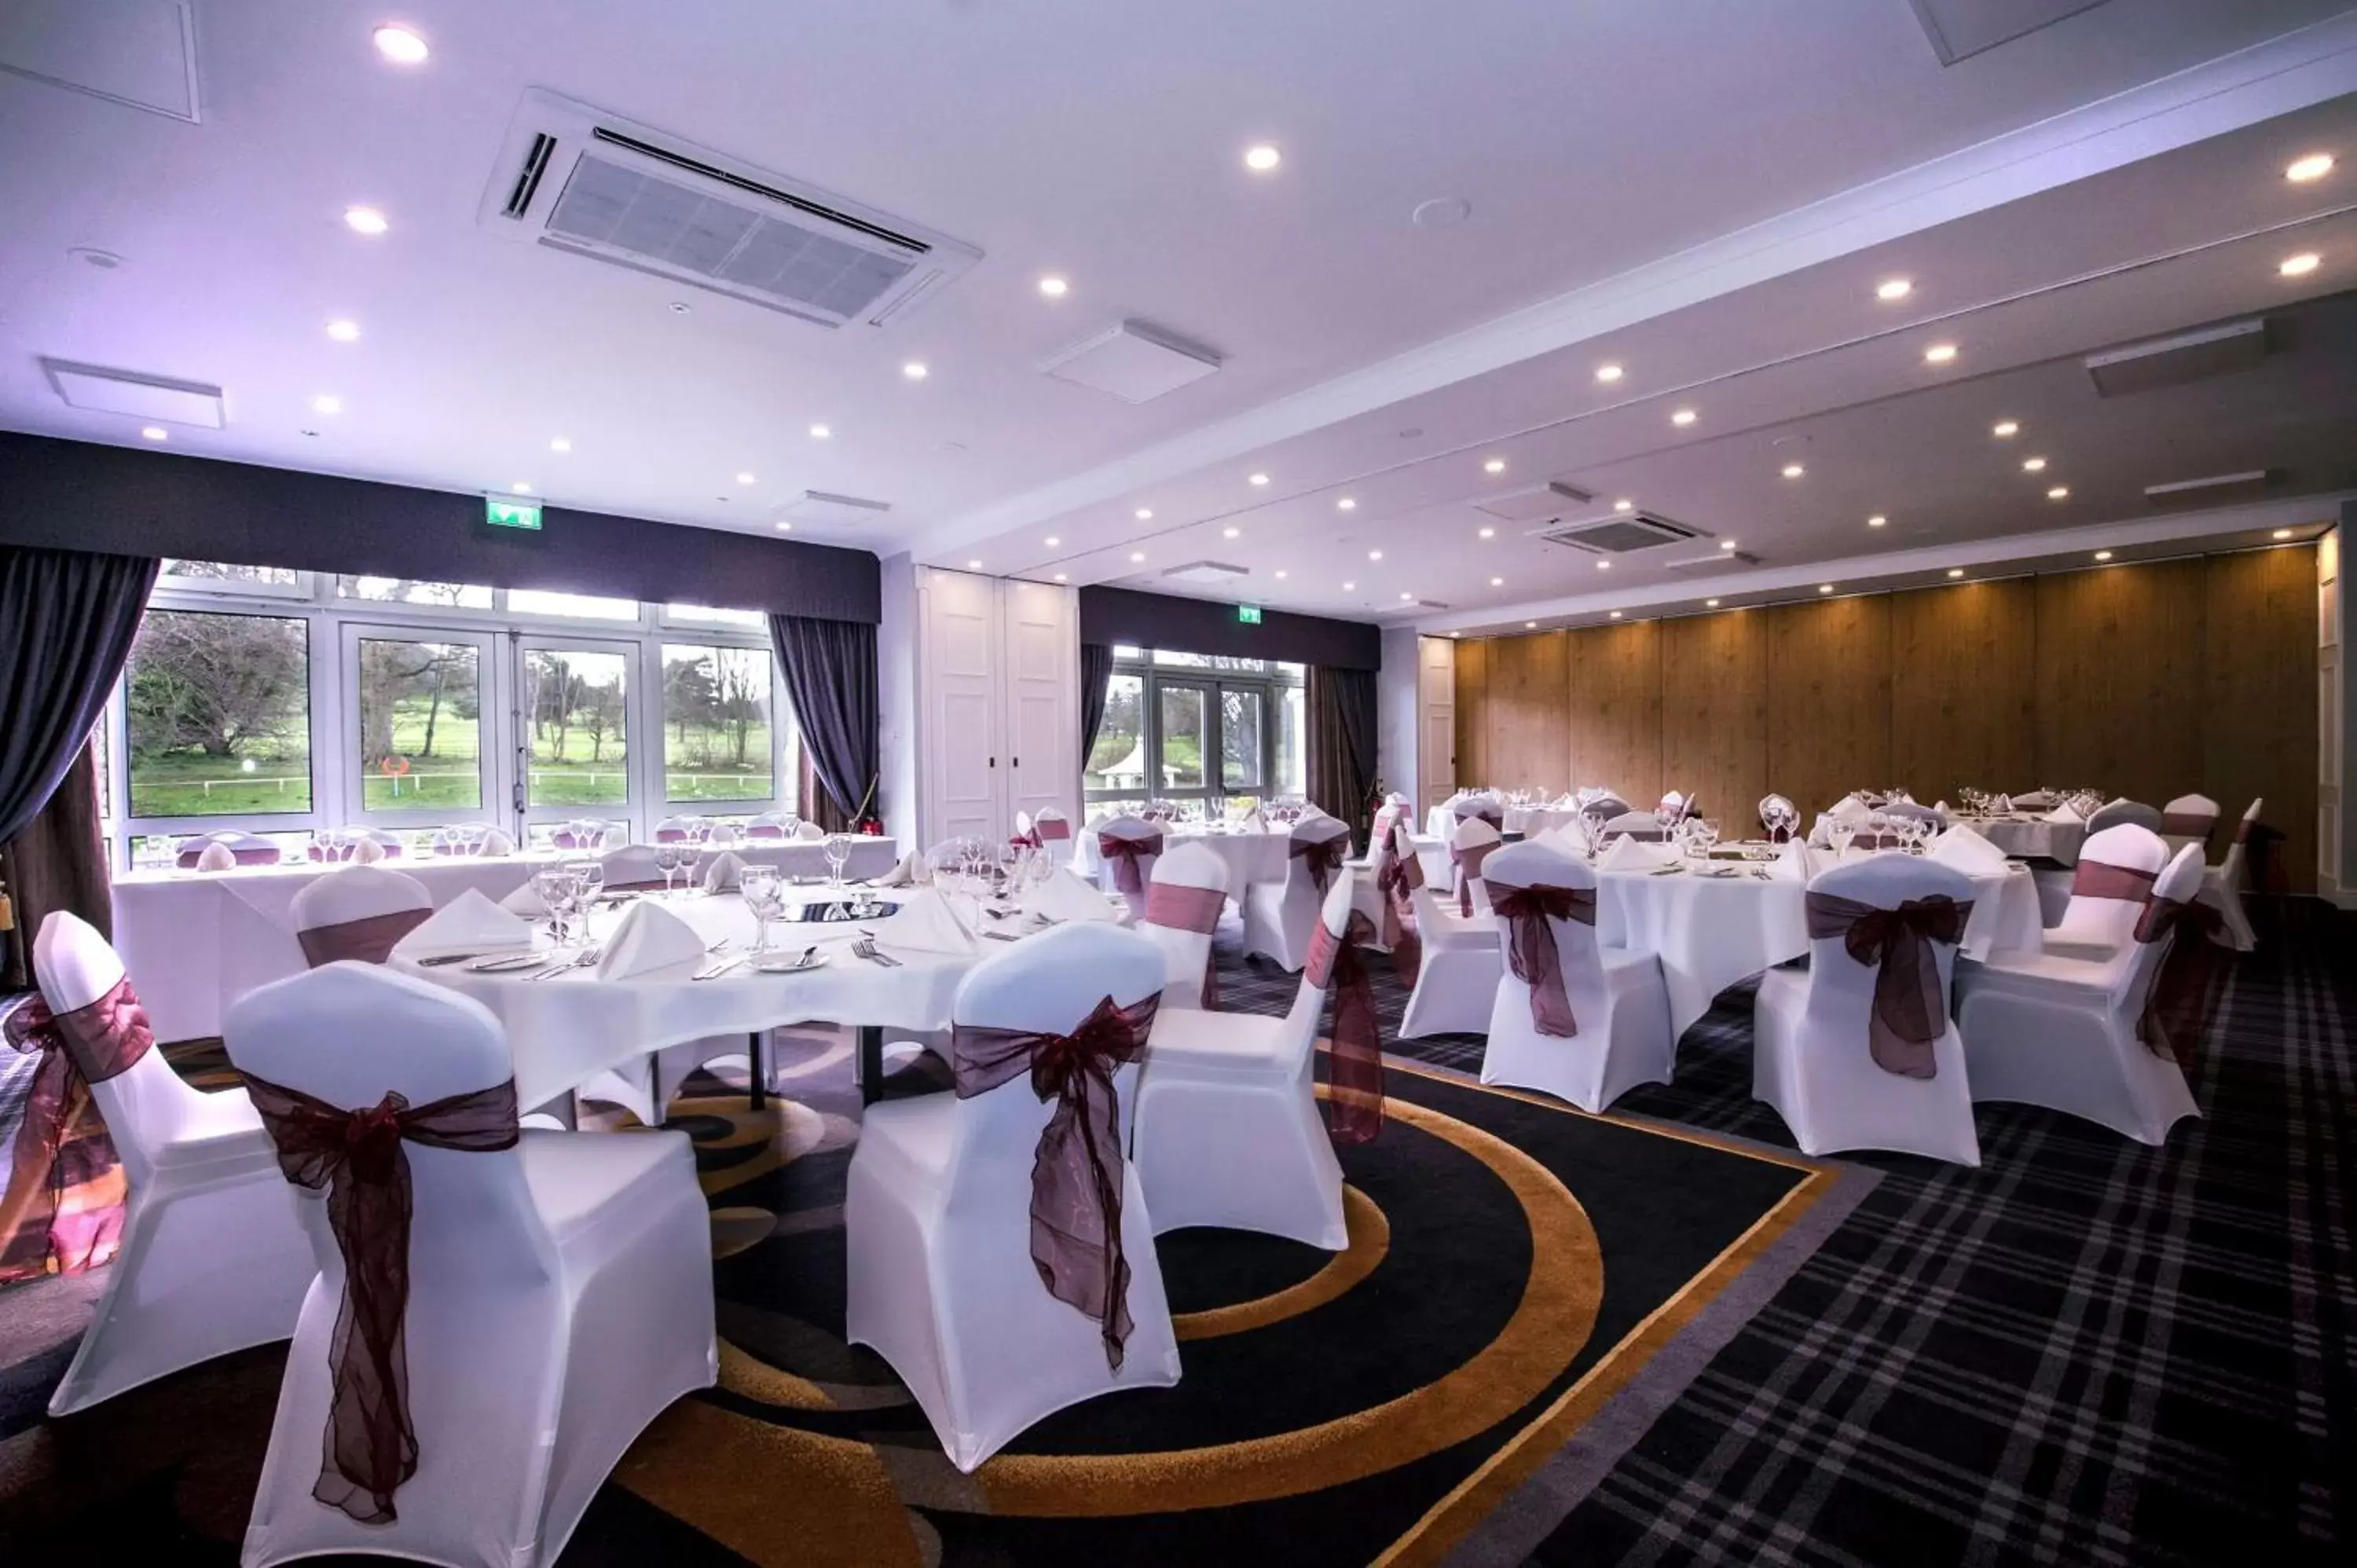 Meeting/conference room, Banquet Facilities in DoubleTree by Hilton Cheltenham